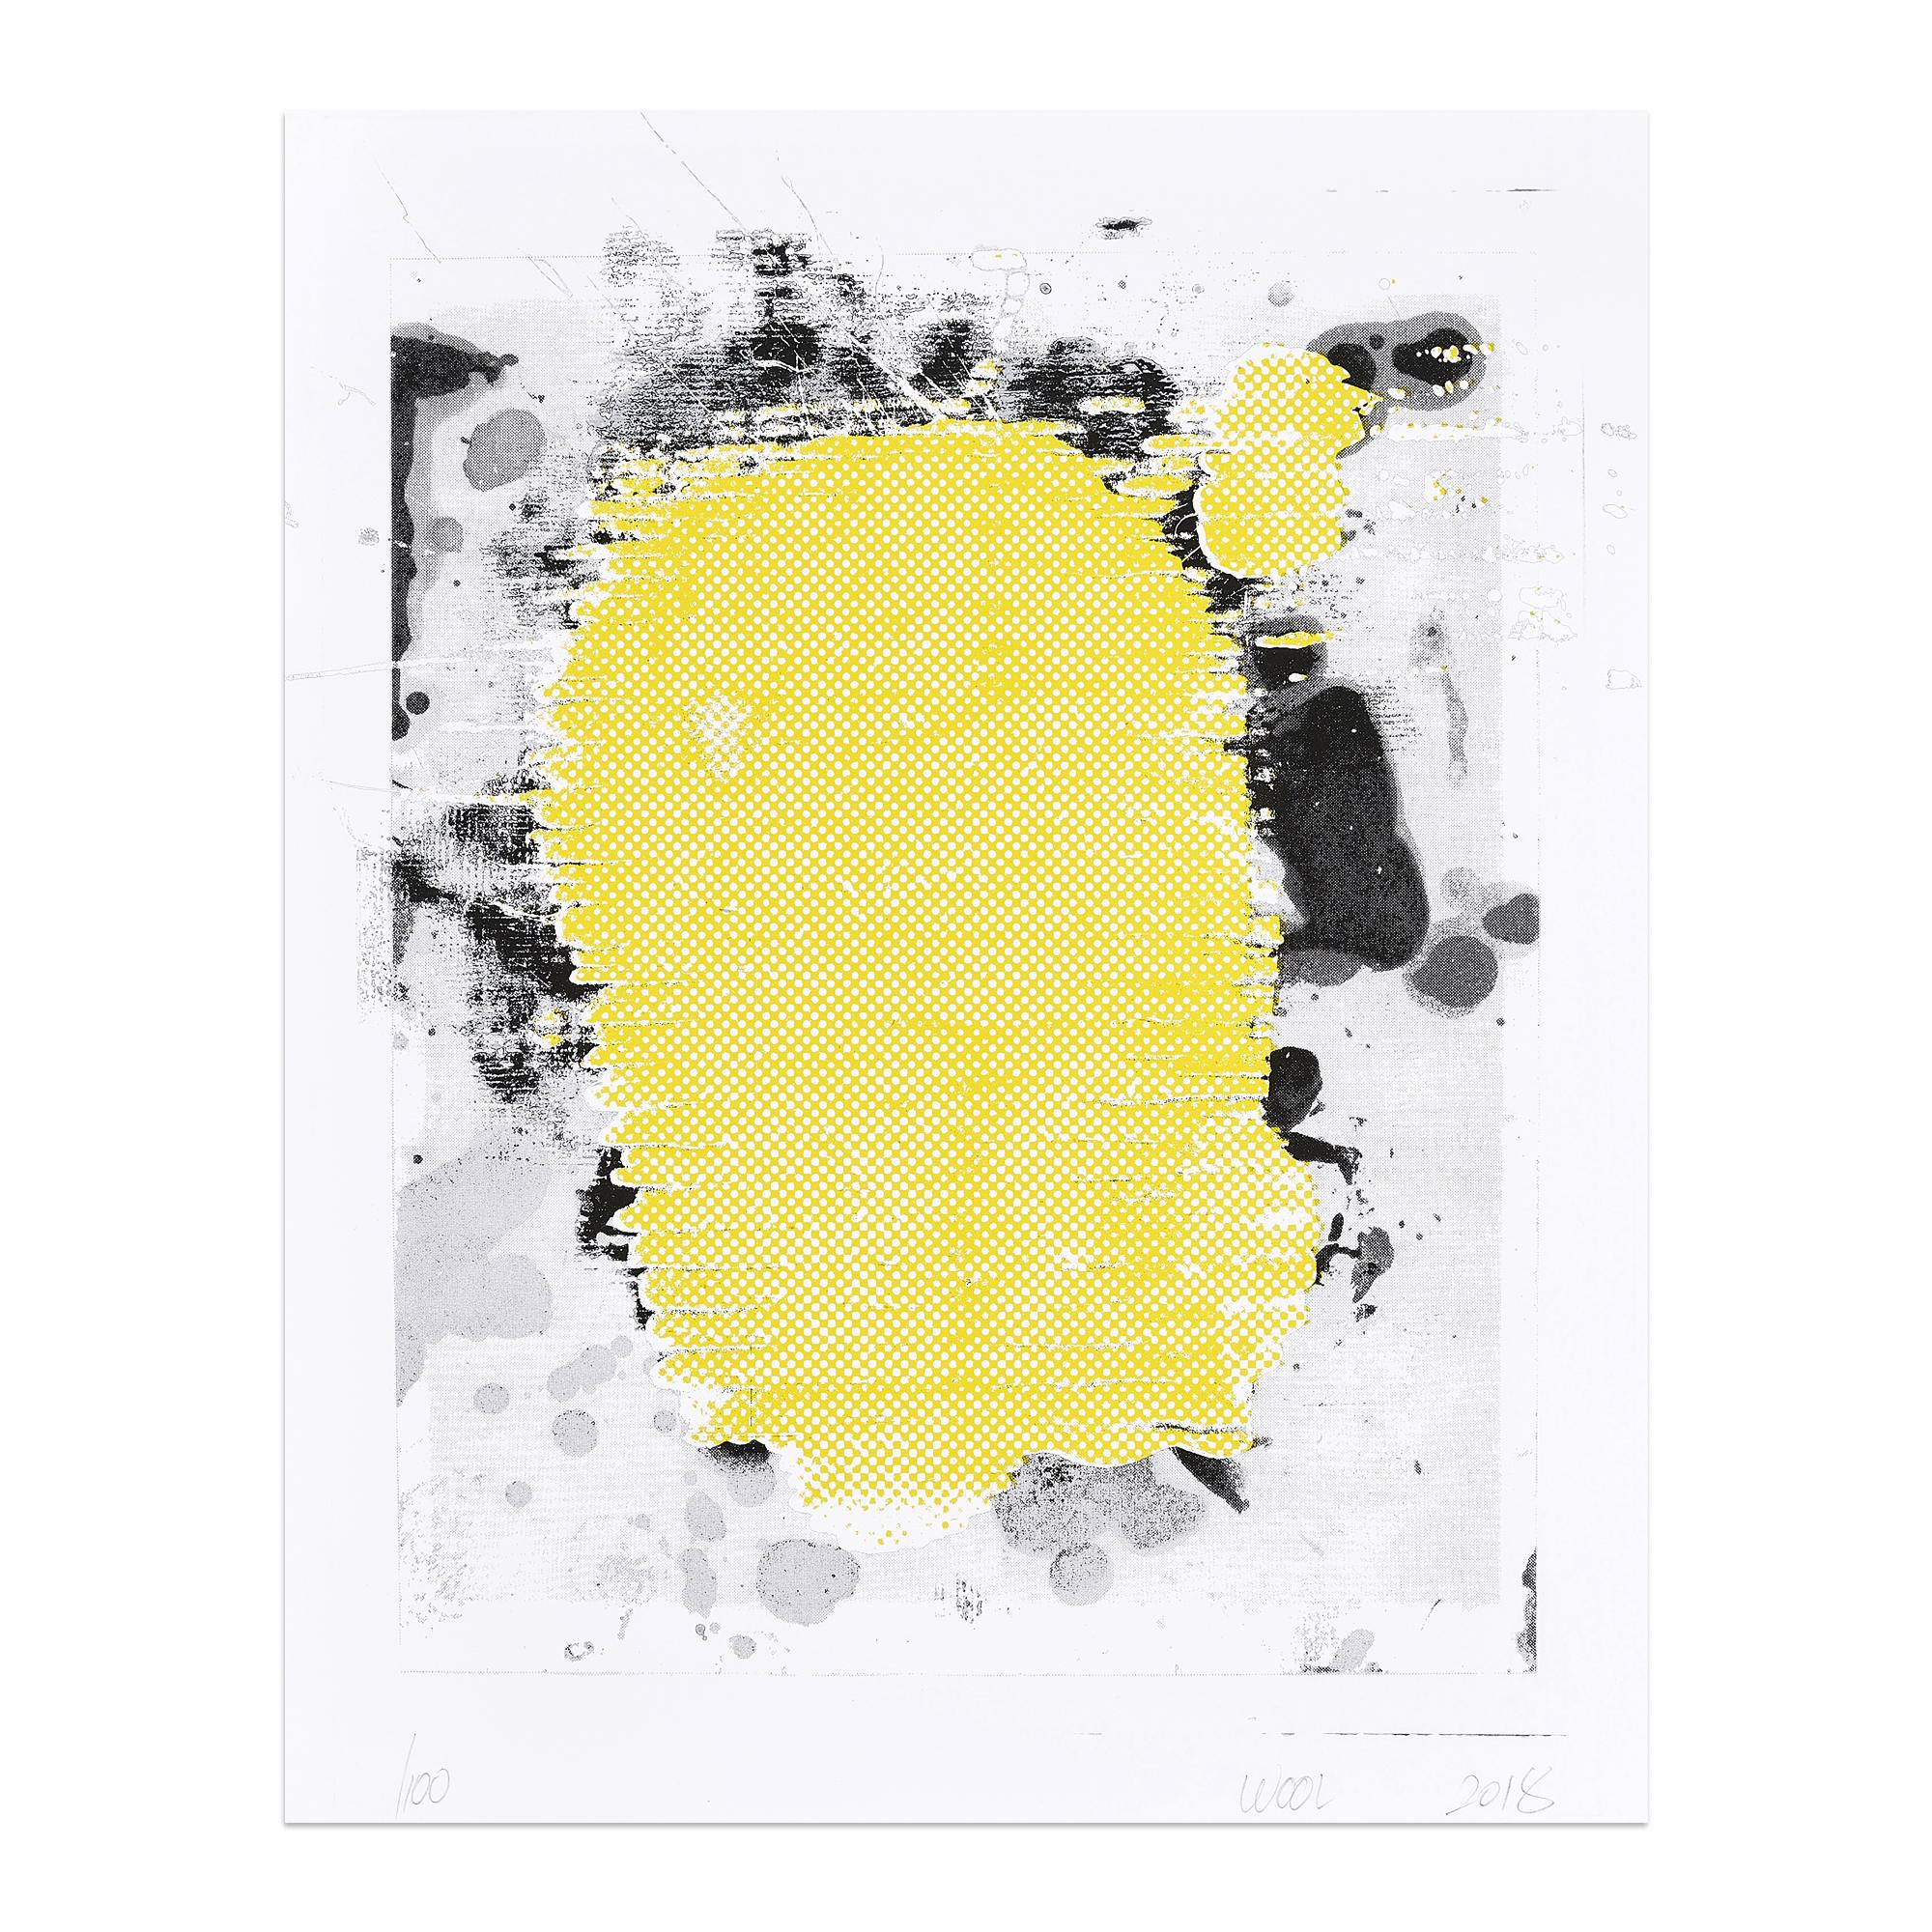 Christopher Wool (born 1955 in Chicago)
Untitled, 2018
Medium: Archival pigment print on cotton vellum paper
Dimensions: 40 x 32 cm
Edition of 100: Hand-signed, numbered and dated
Publisher: Die Welt, Berlin
Condition: Very good 